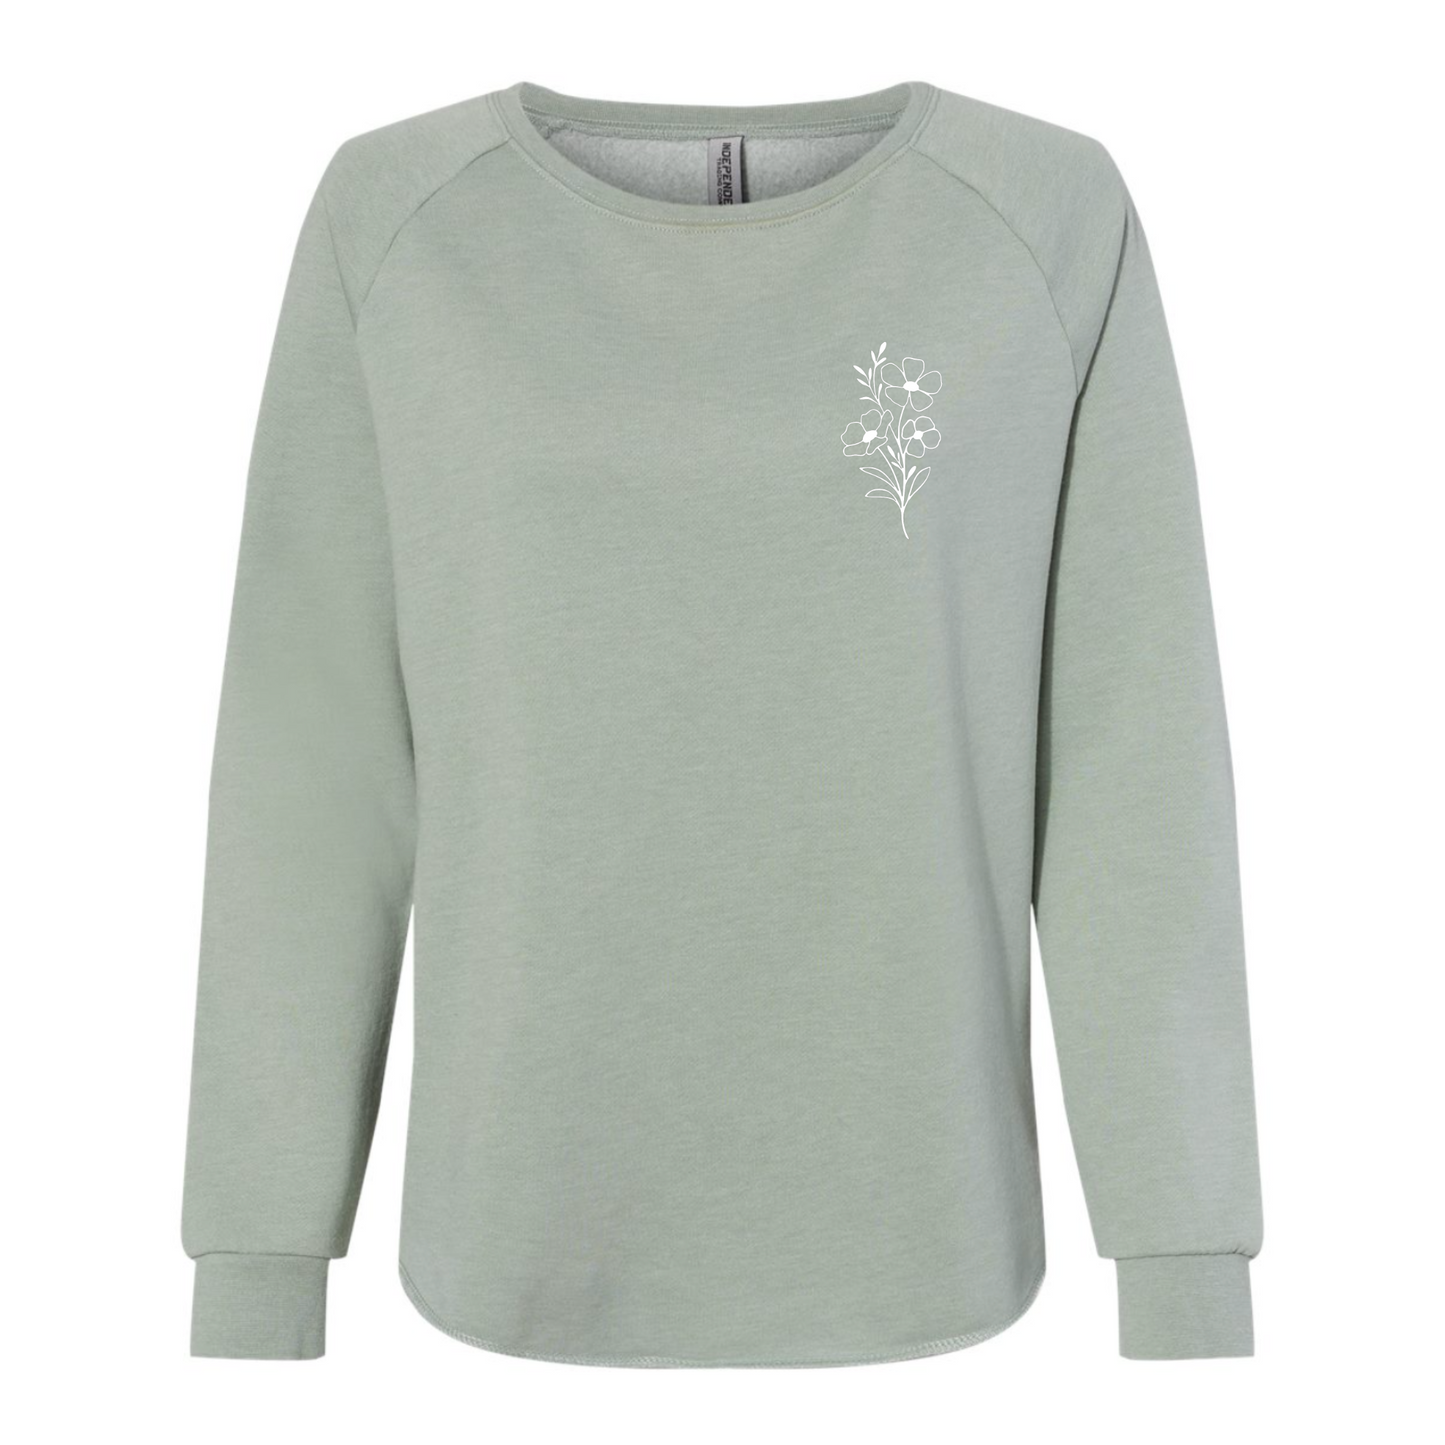 Front view of the sage sweatshirt with white flower emblem